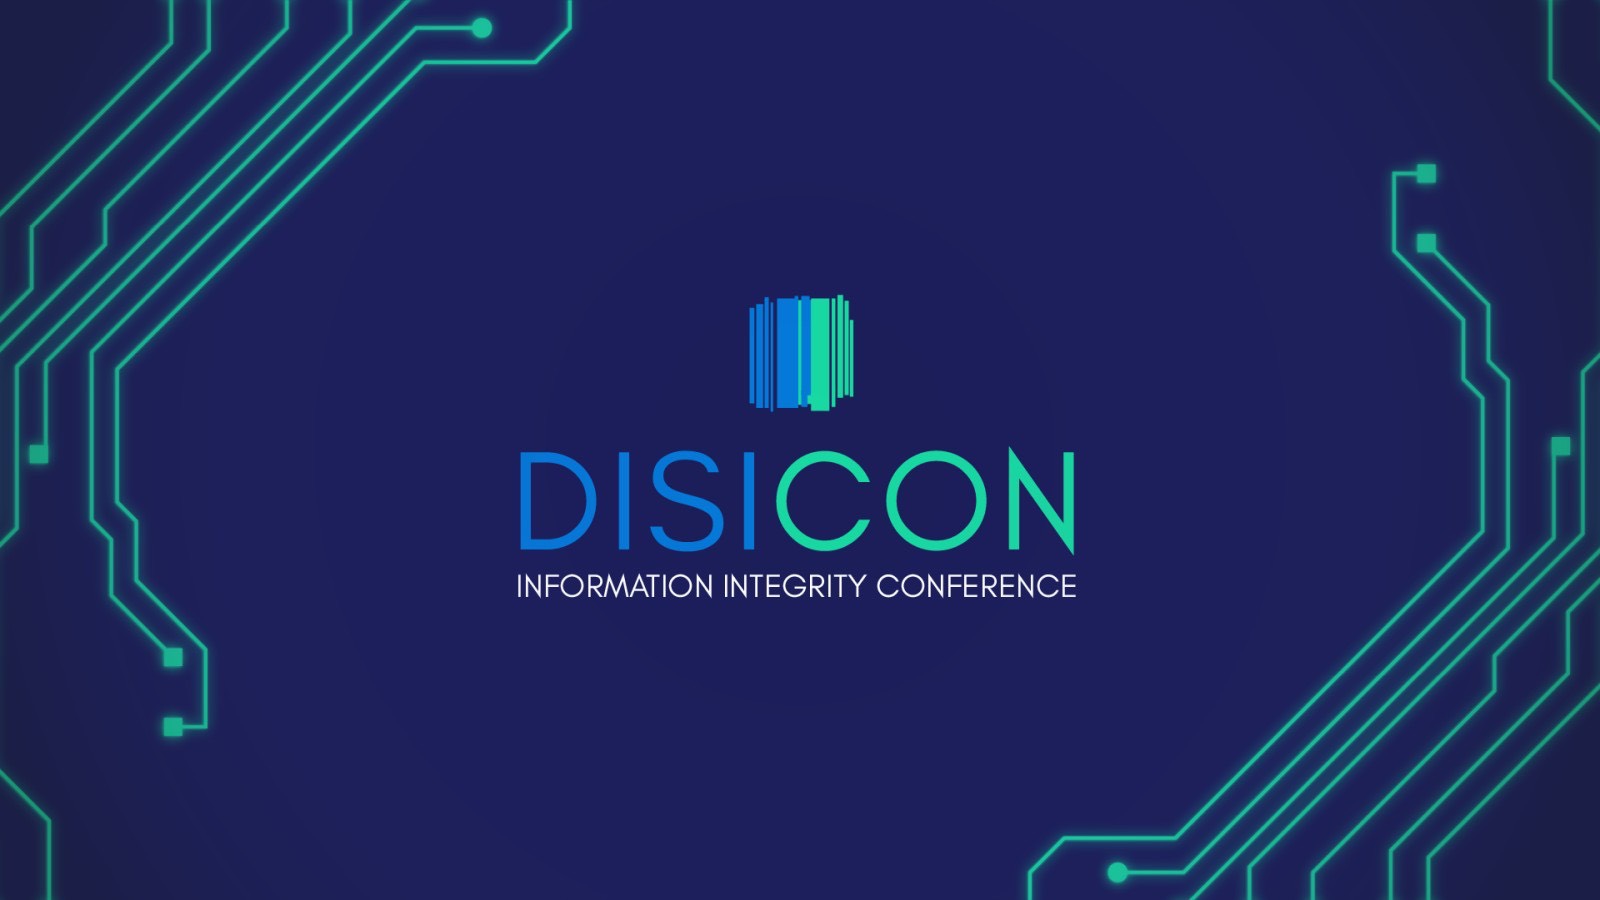 DISICON Information Integrity Conference 2021 National Democratic